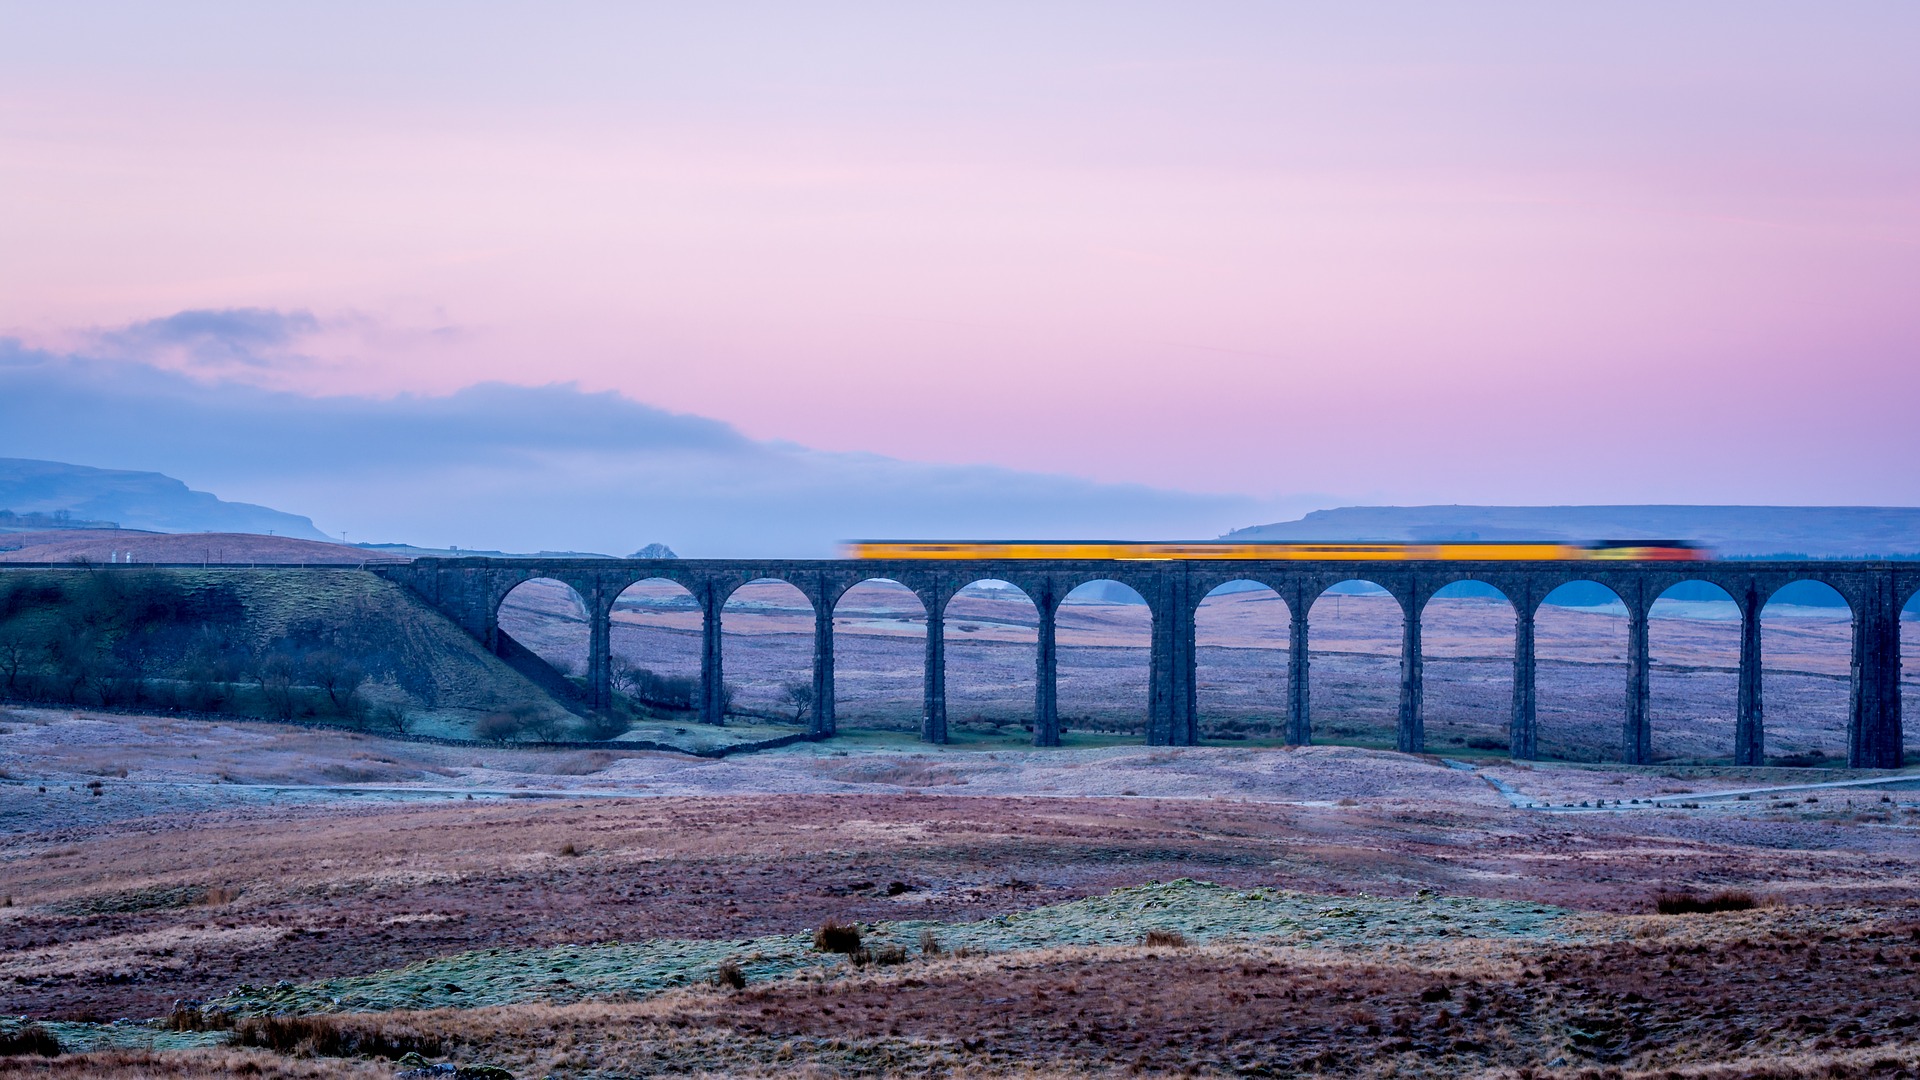 An image of Ribblehead Viaduct